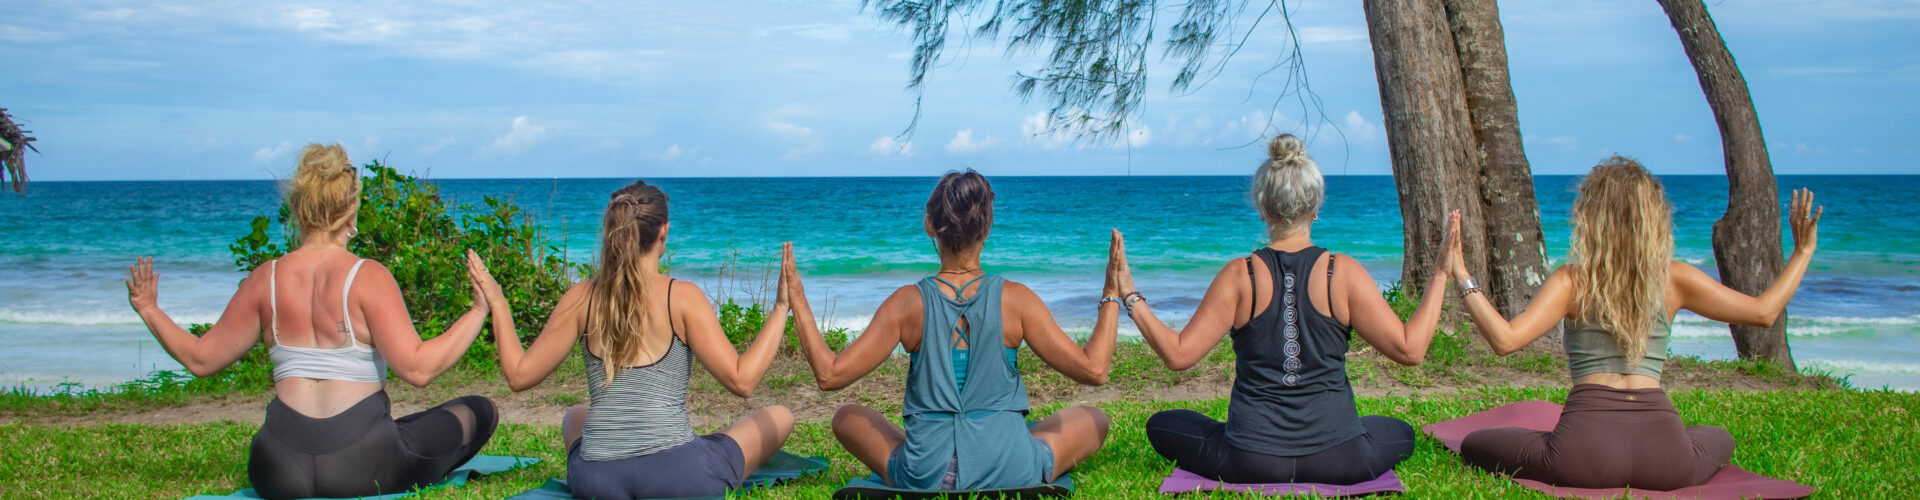 What To Expect From A Destination Yoga Retreat